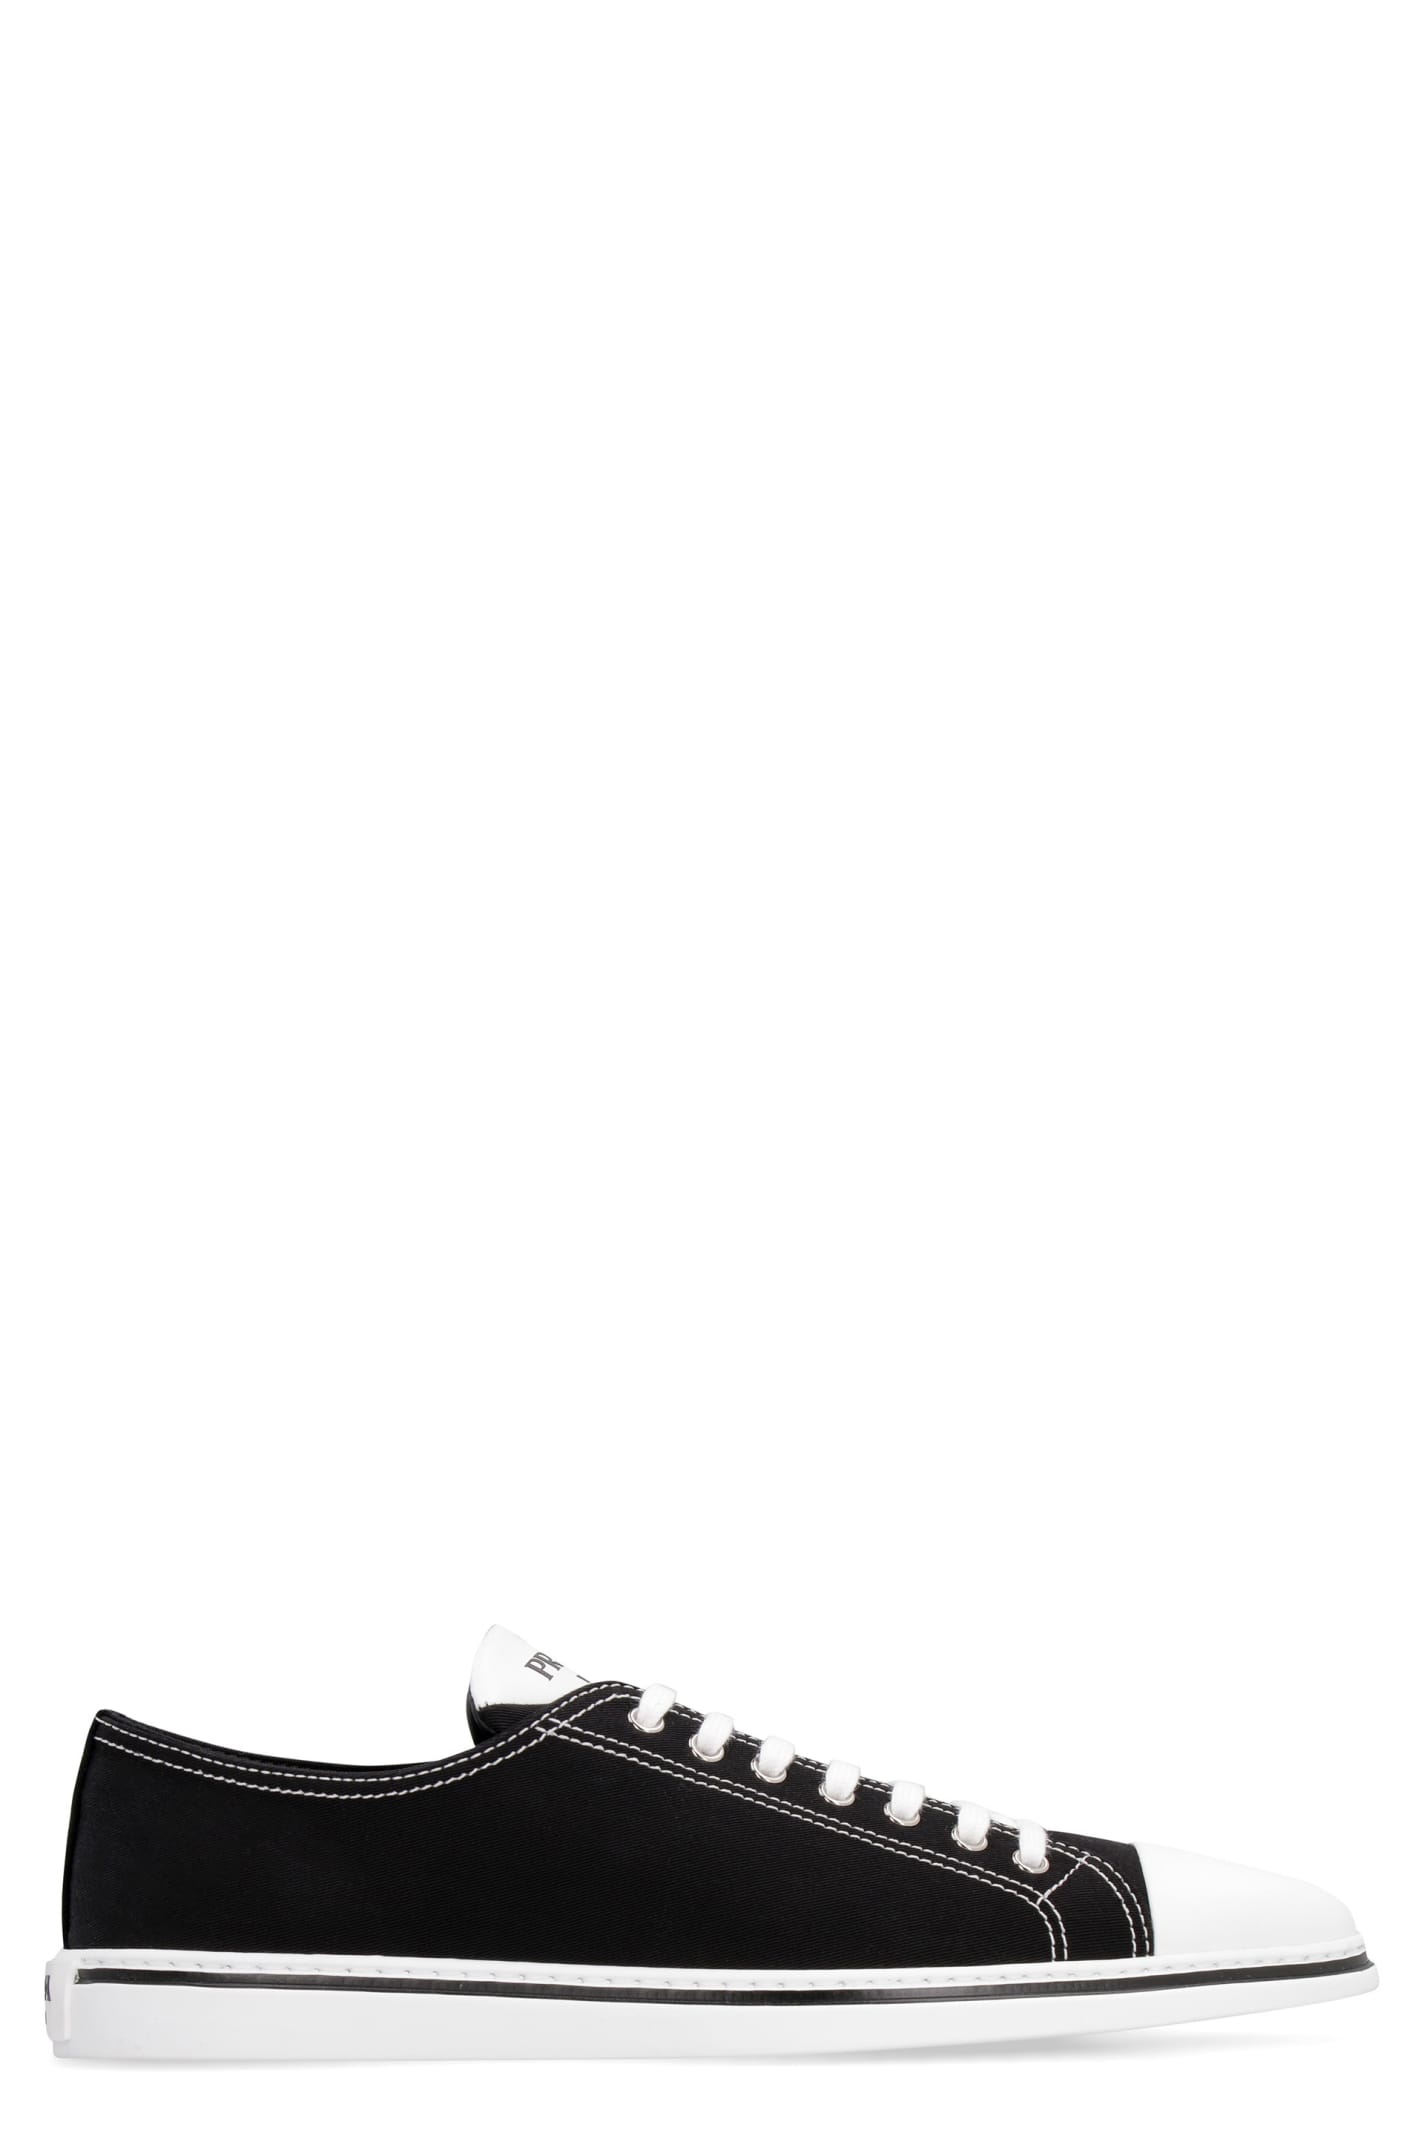 Buy Prada Fabric Low-top Sneakers online, shop Prada shoes with free shipping